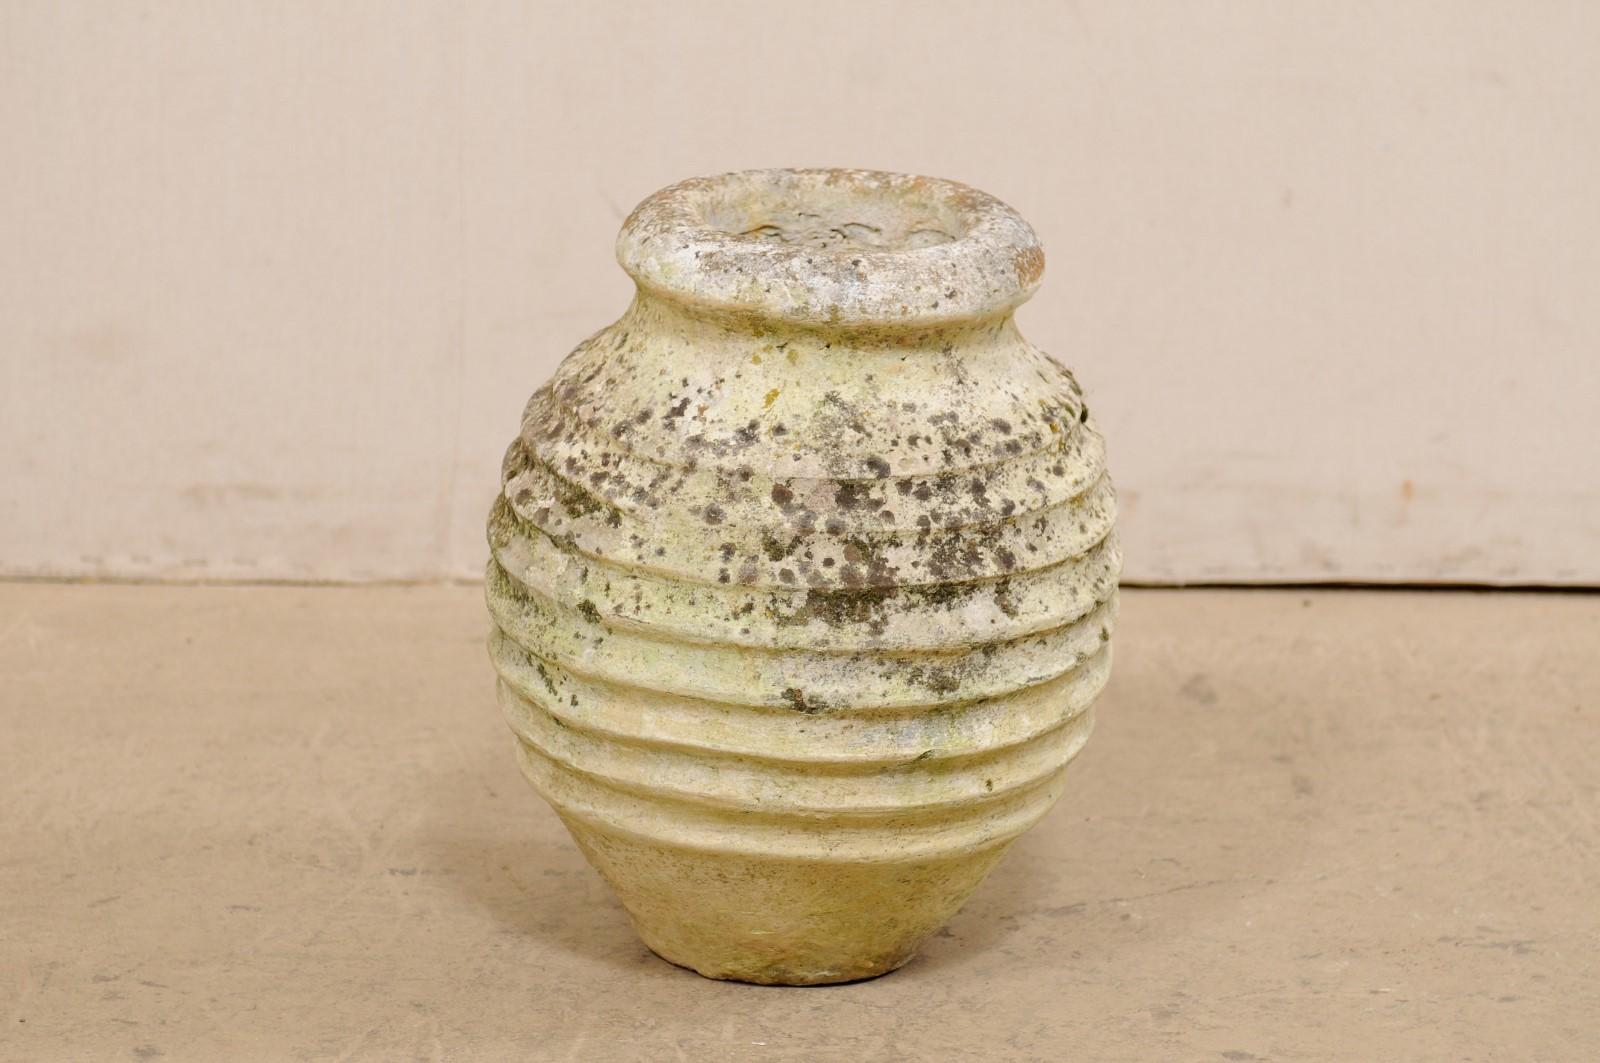 A Spanish cast-stone pot from the 19th century. This antique vessel from Spain is bulb-shaped and has a thick and pronounced lip at top, a nicely ribbed texture around it's body, and rests upon a flattened base. The jar stands approximately 15.75